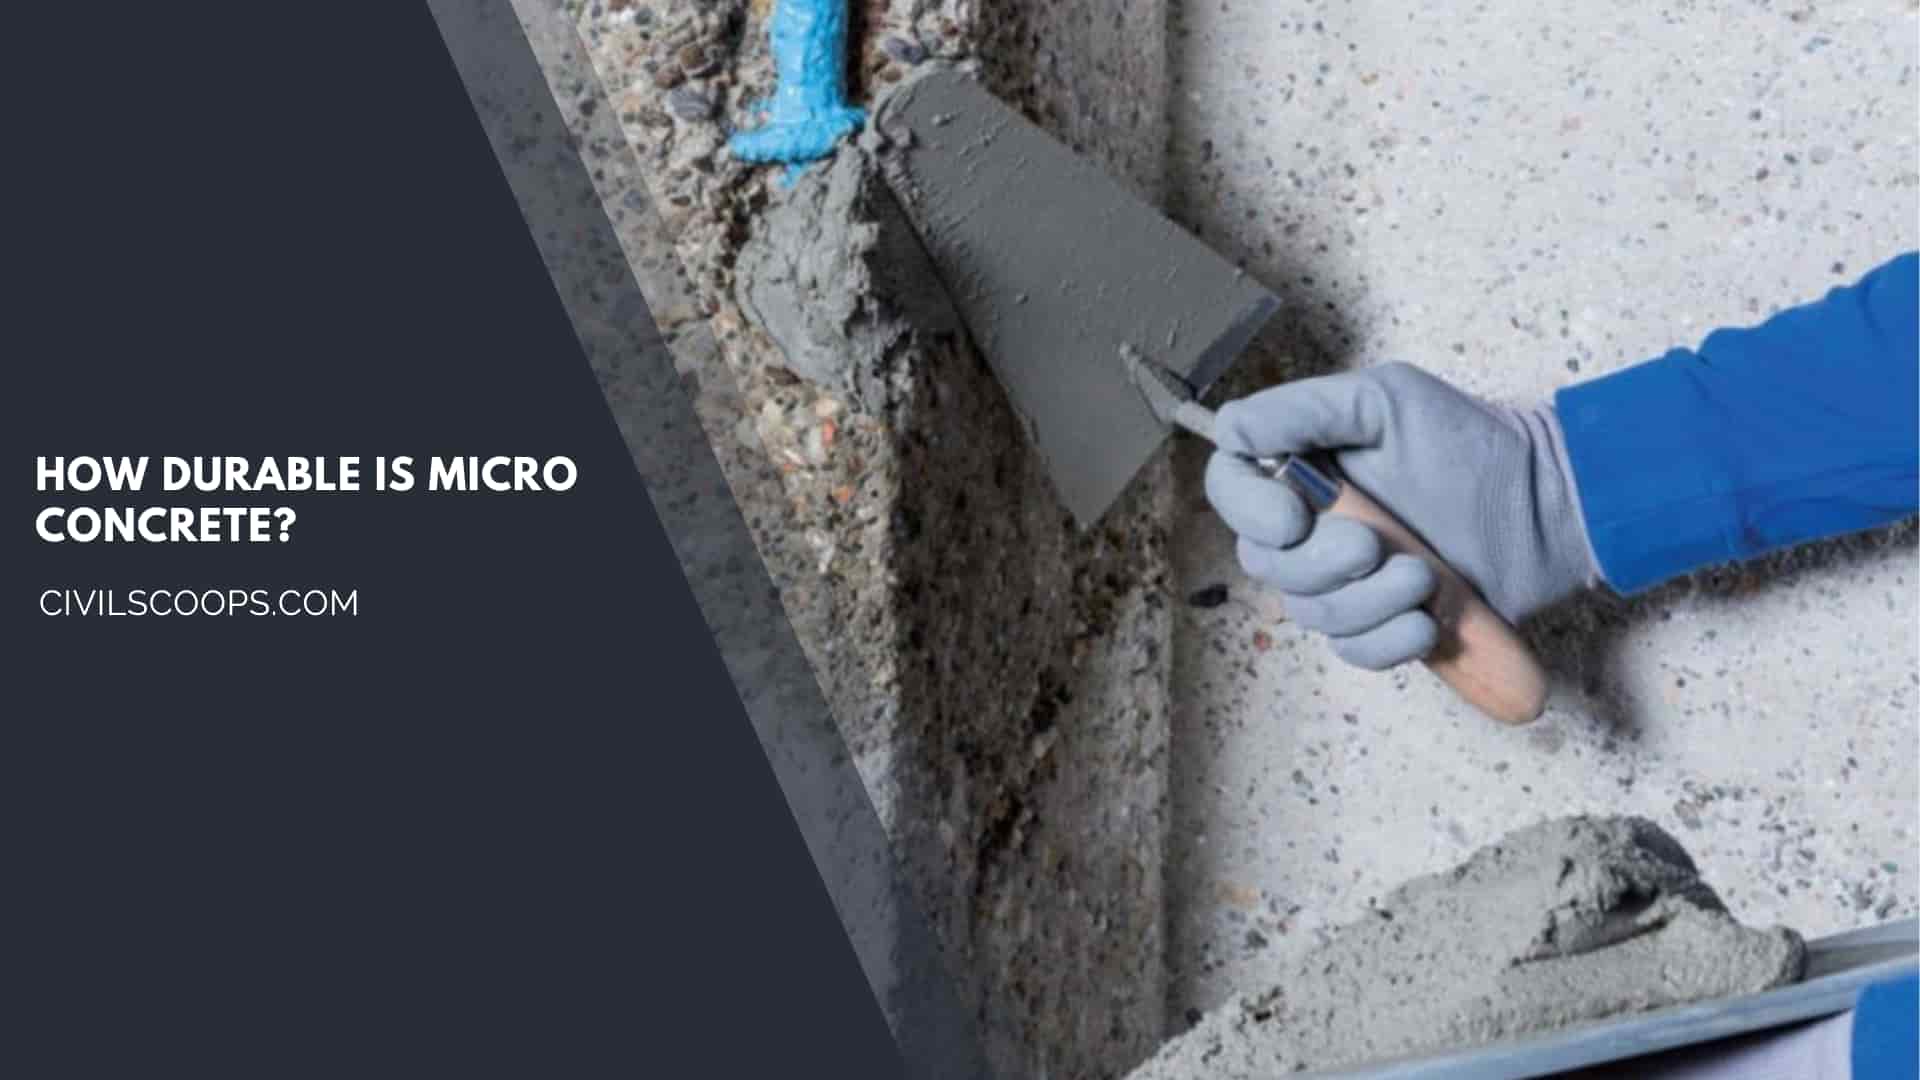 How Durable Is Micro Concrete?